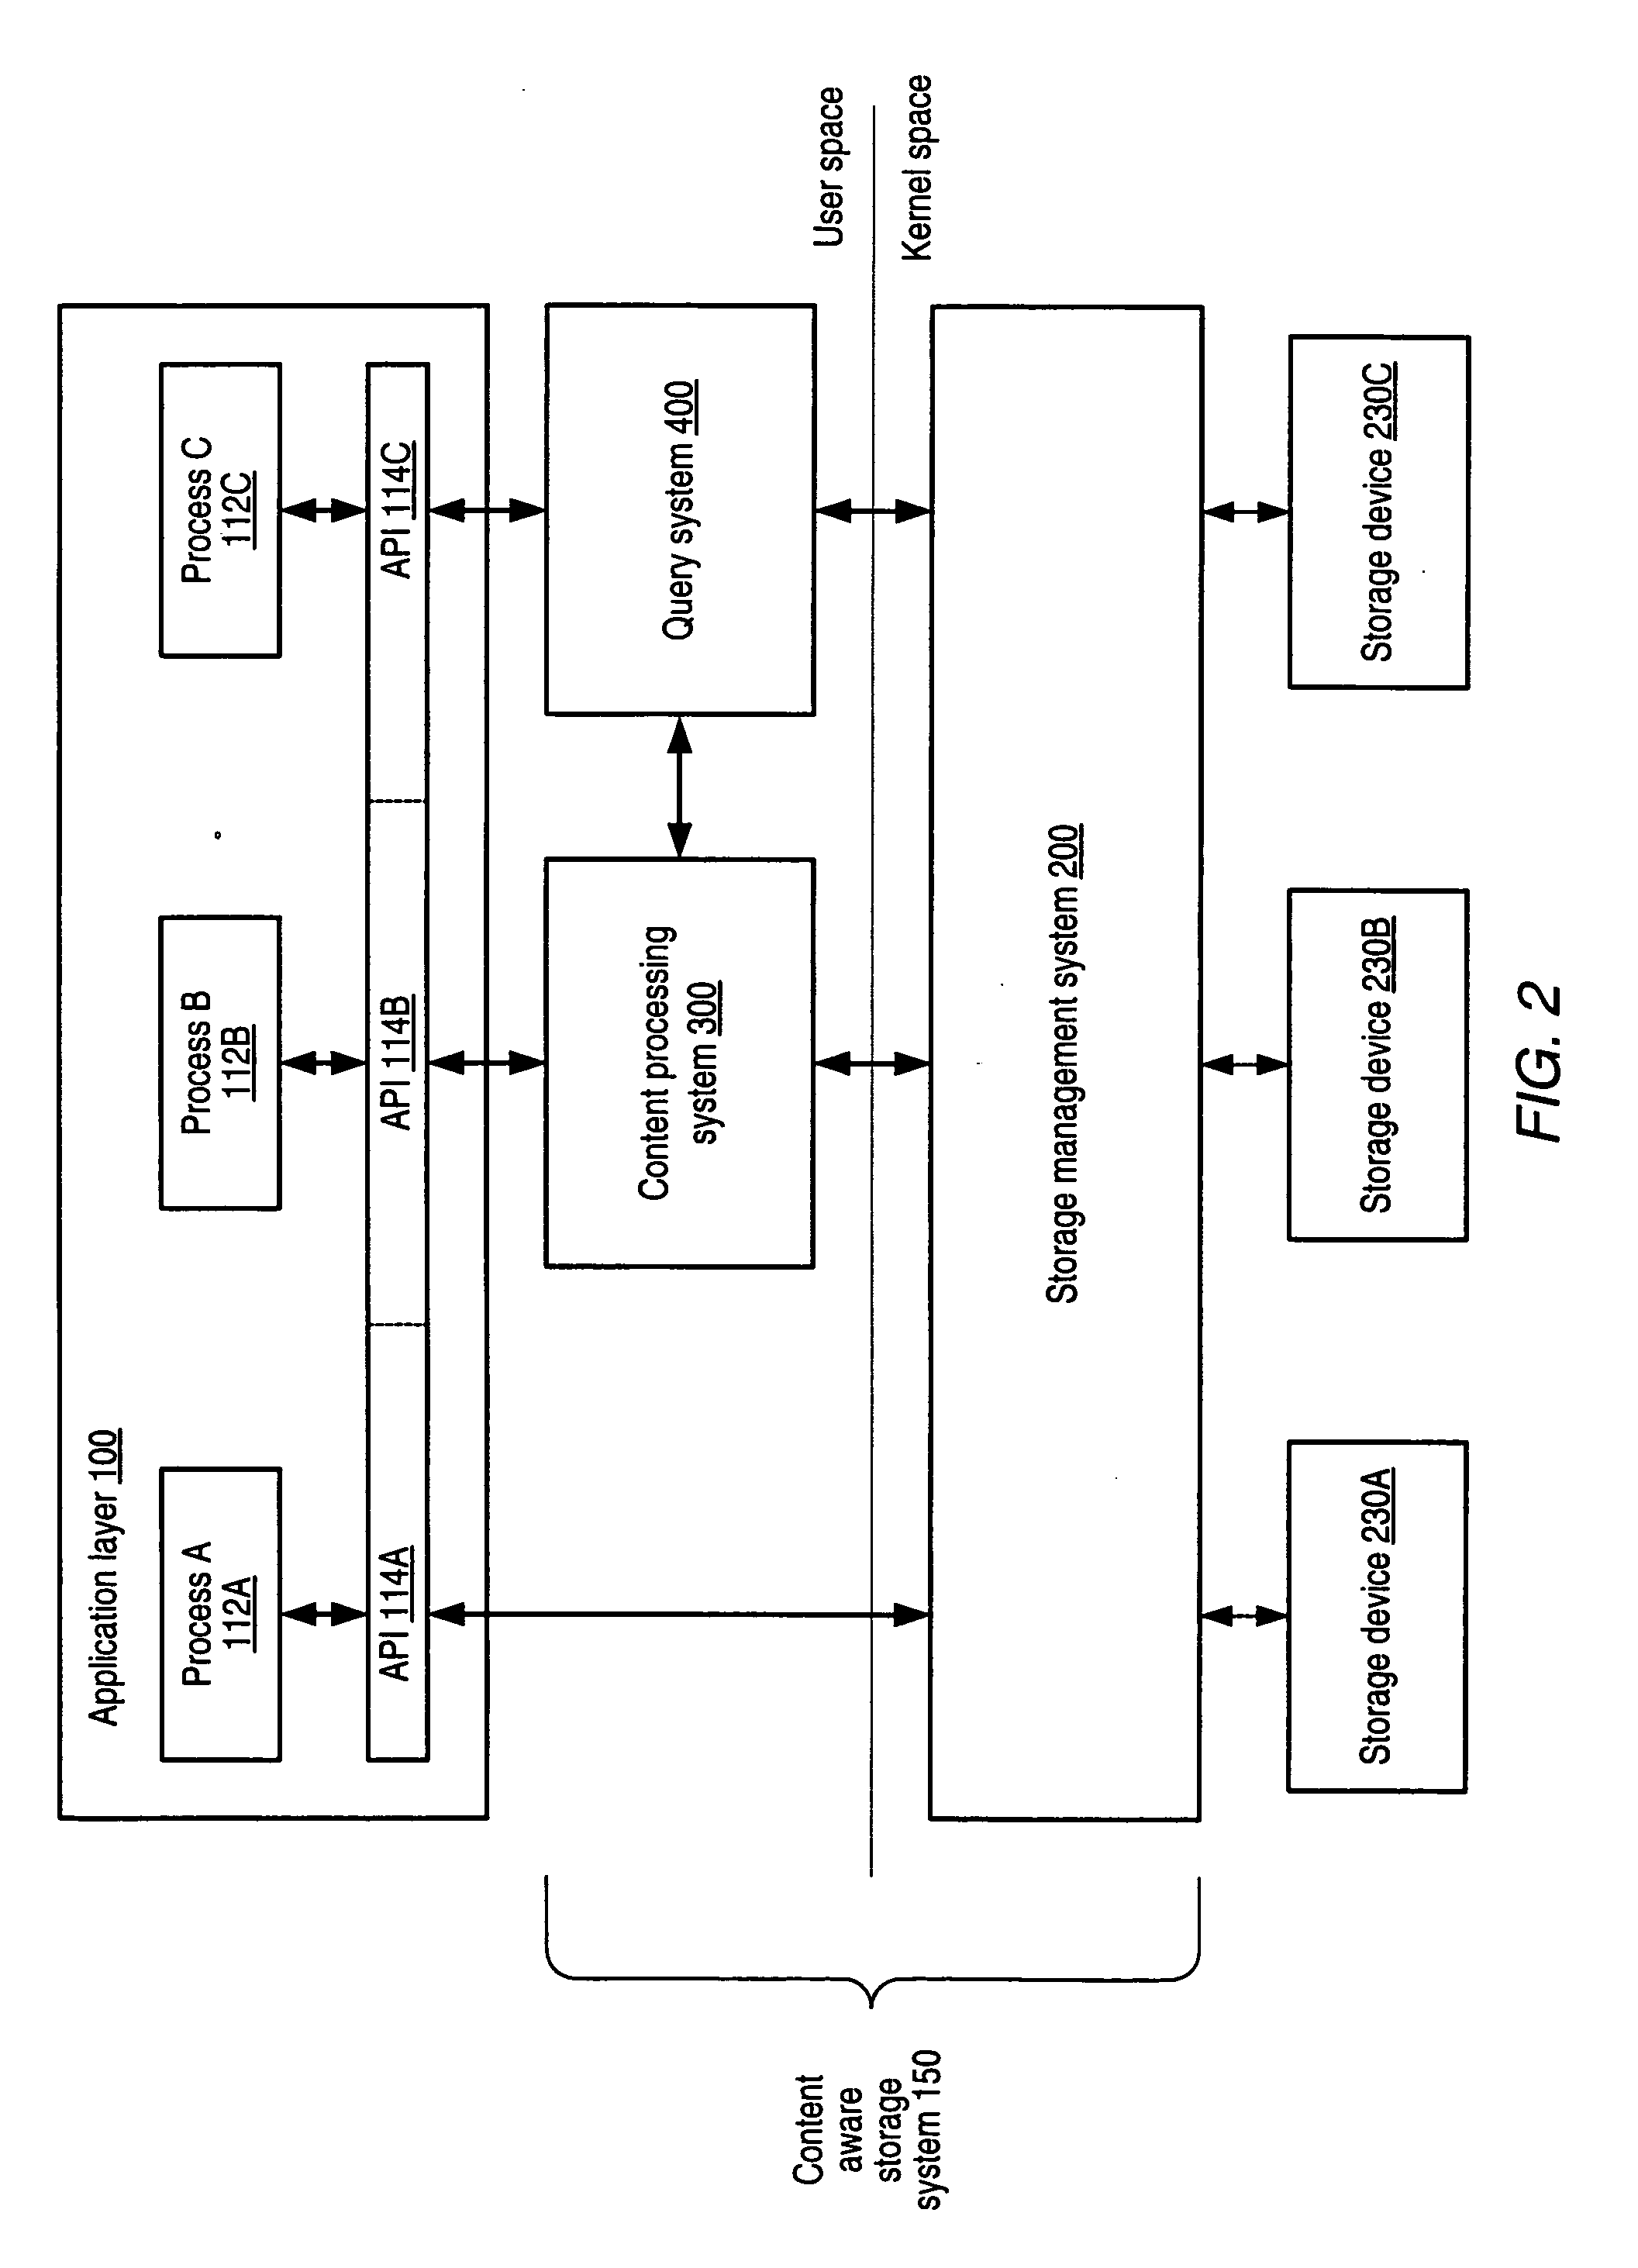 System and method for file system content processing